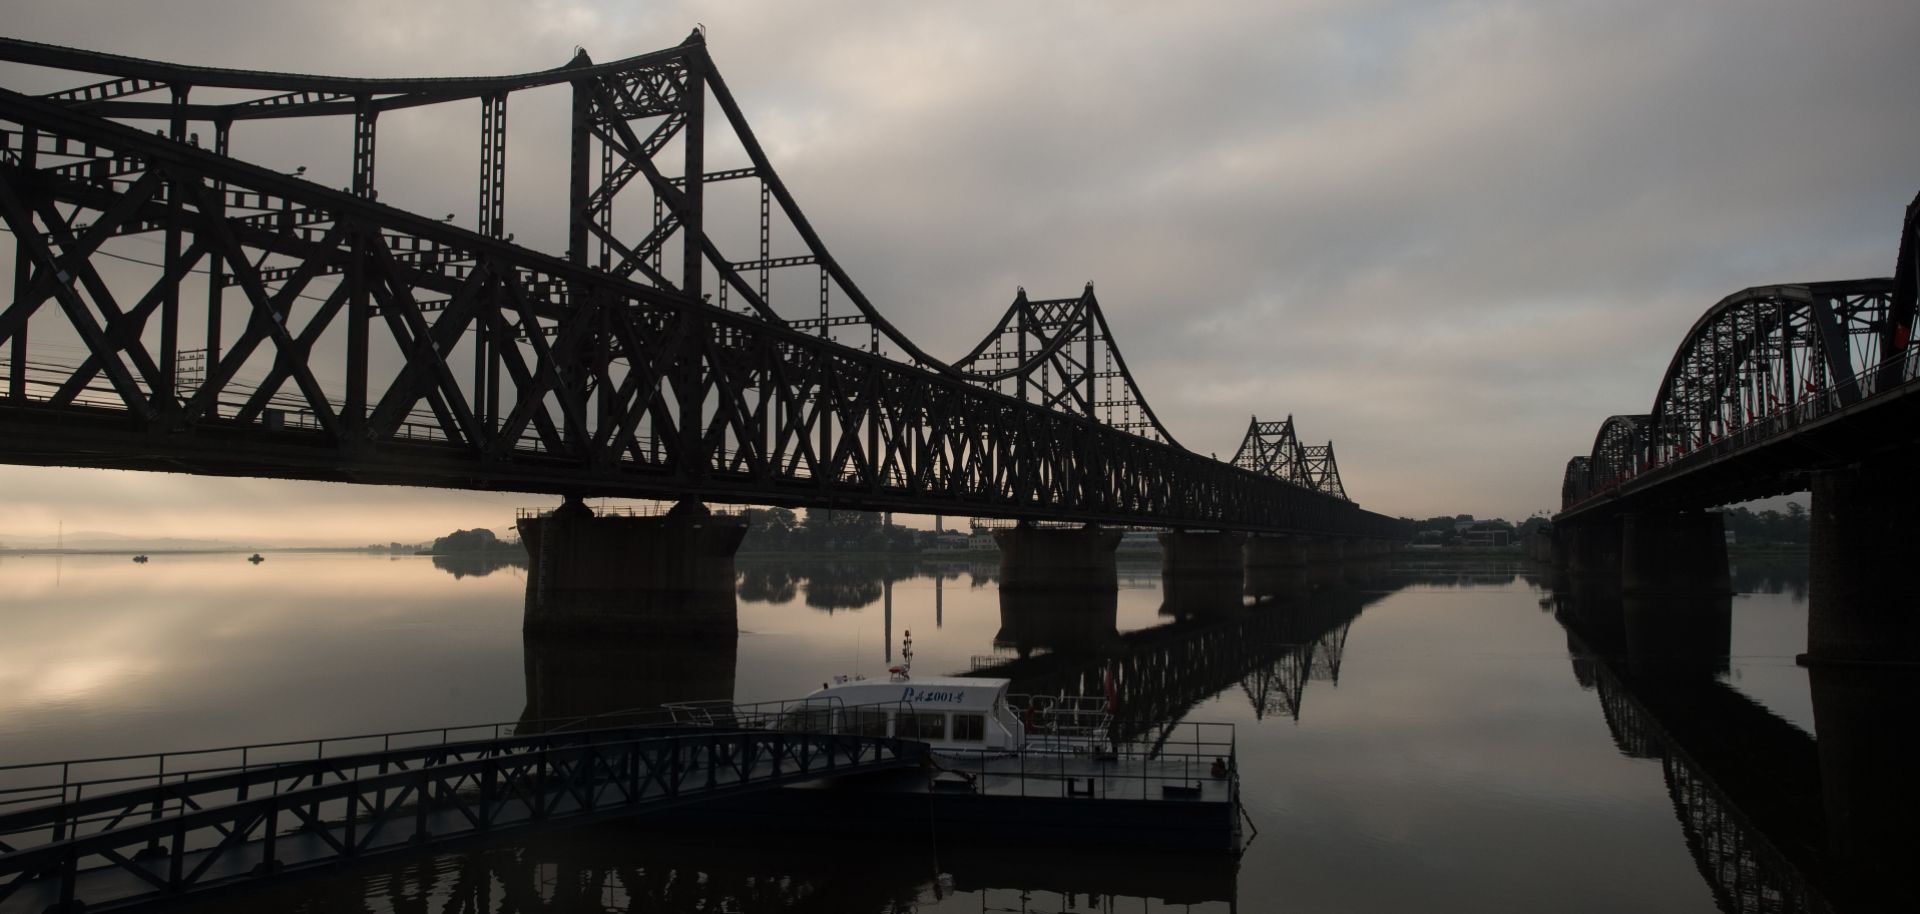 A picture showing the The sun rising over the Sino-Korean Friendship bridge on the Yalu River, connecting the North Korean town of Sinuiju and the Chinese border city of Dandong.